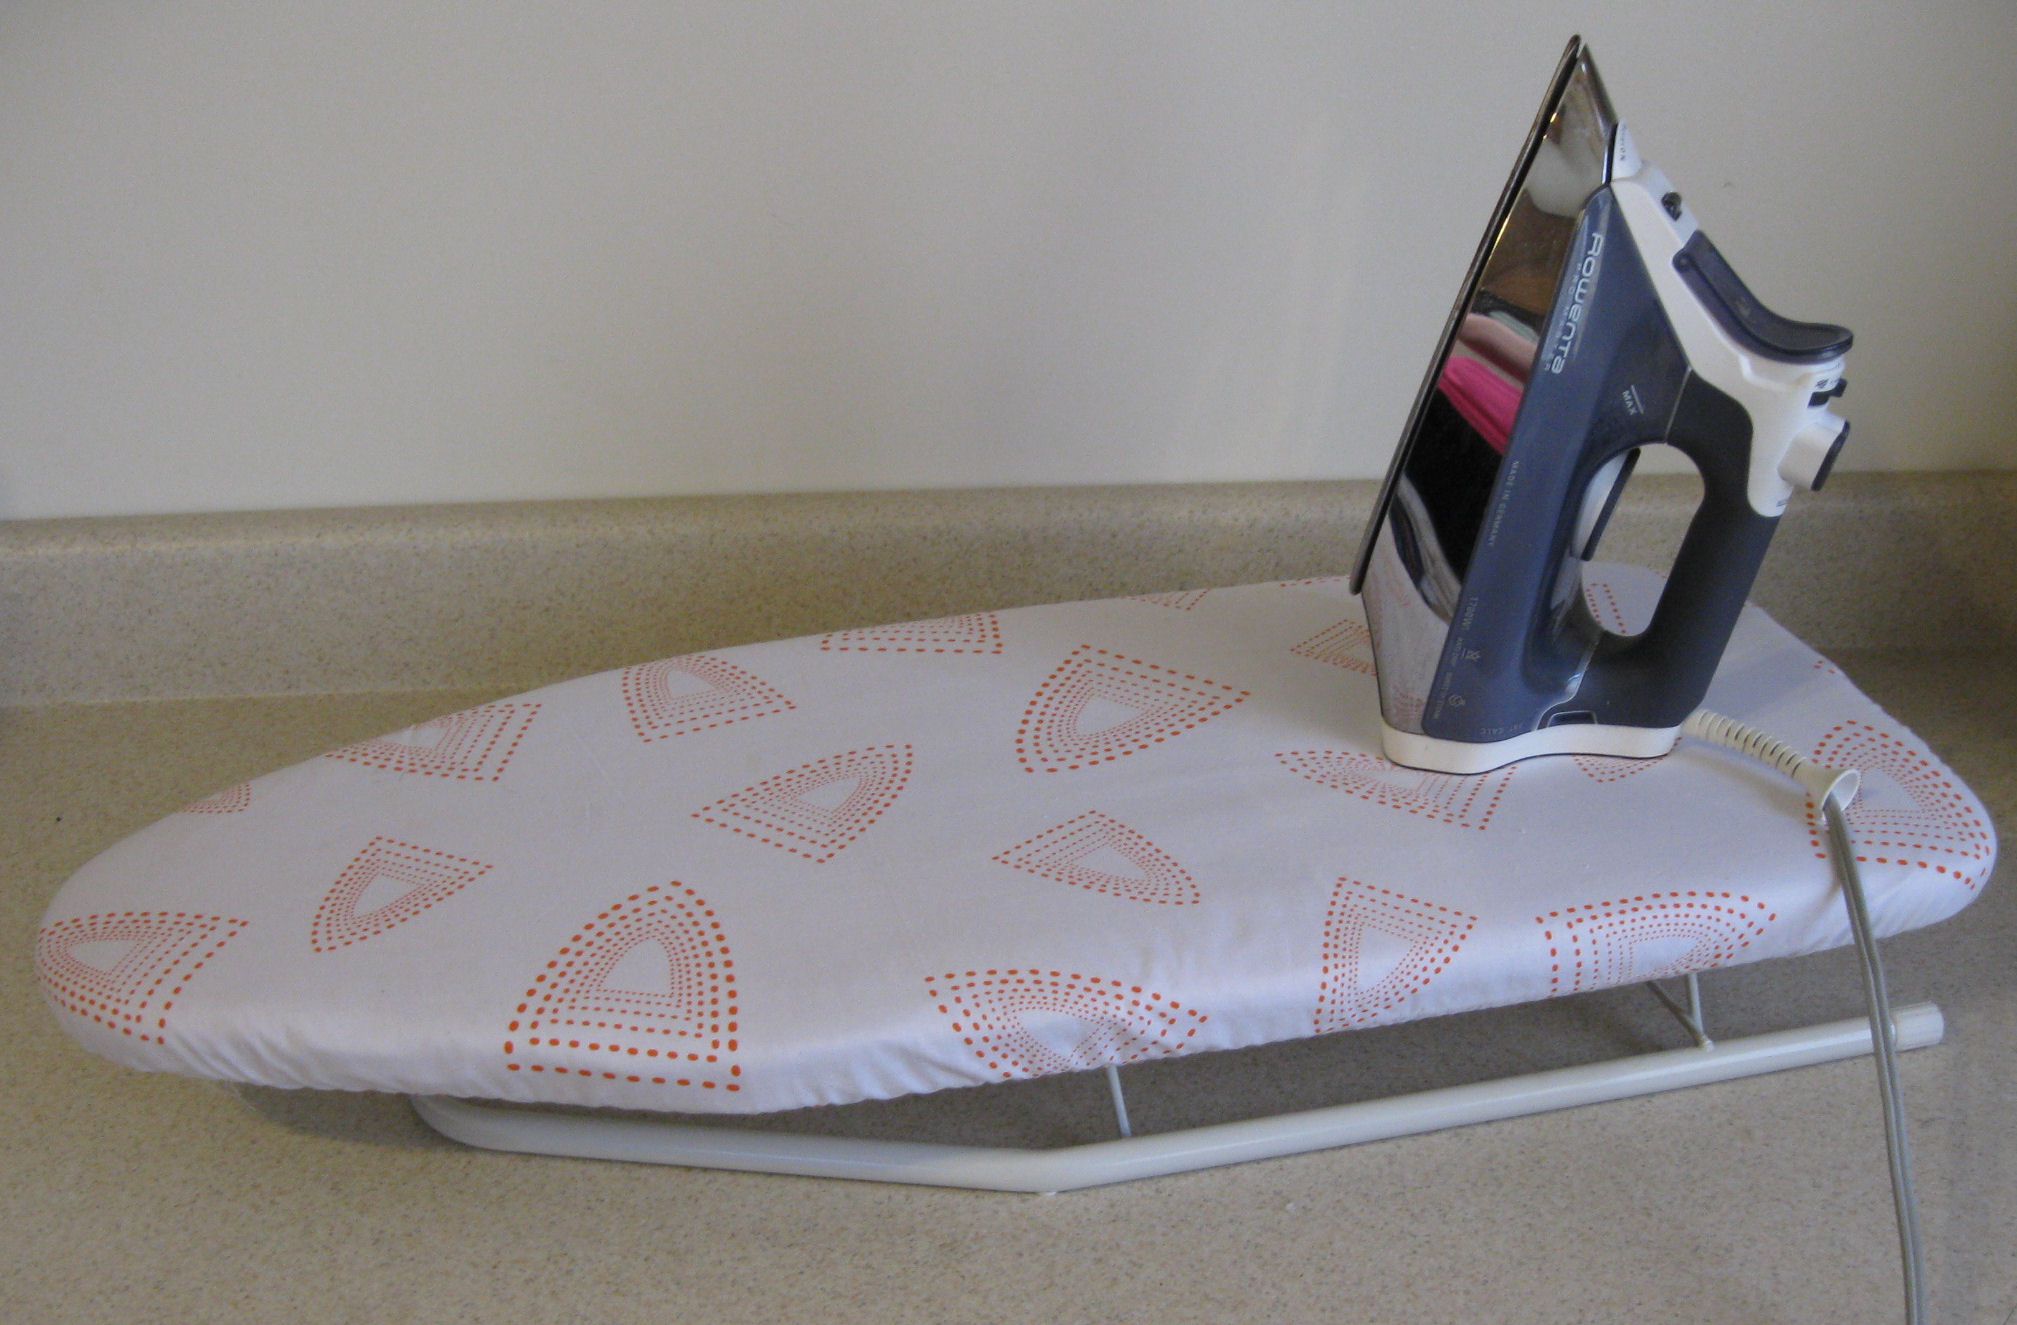 Download Free Pattern for an Ironing Board Cover - Materials